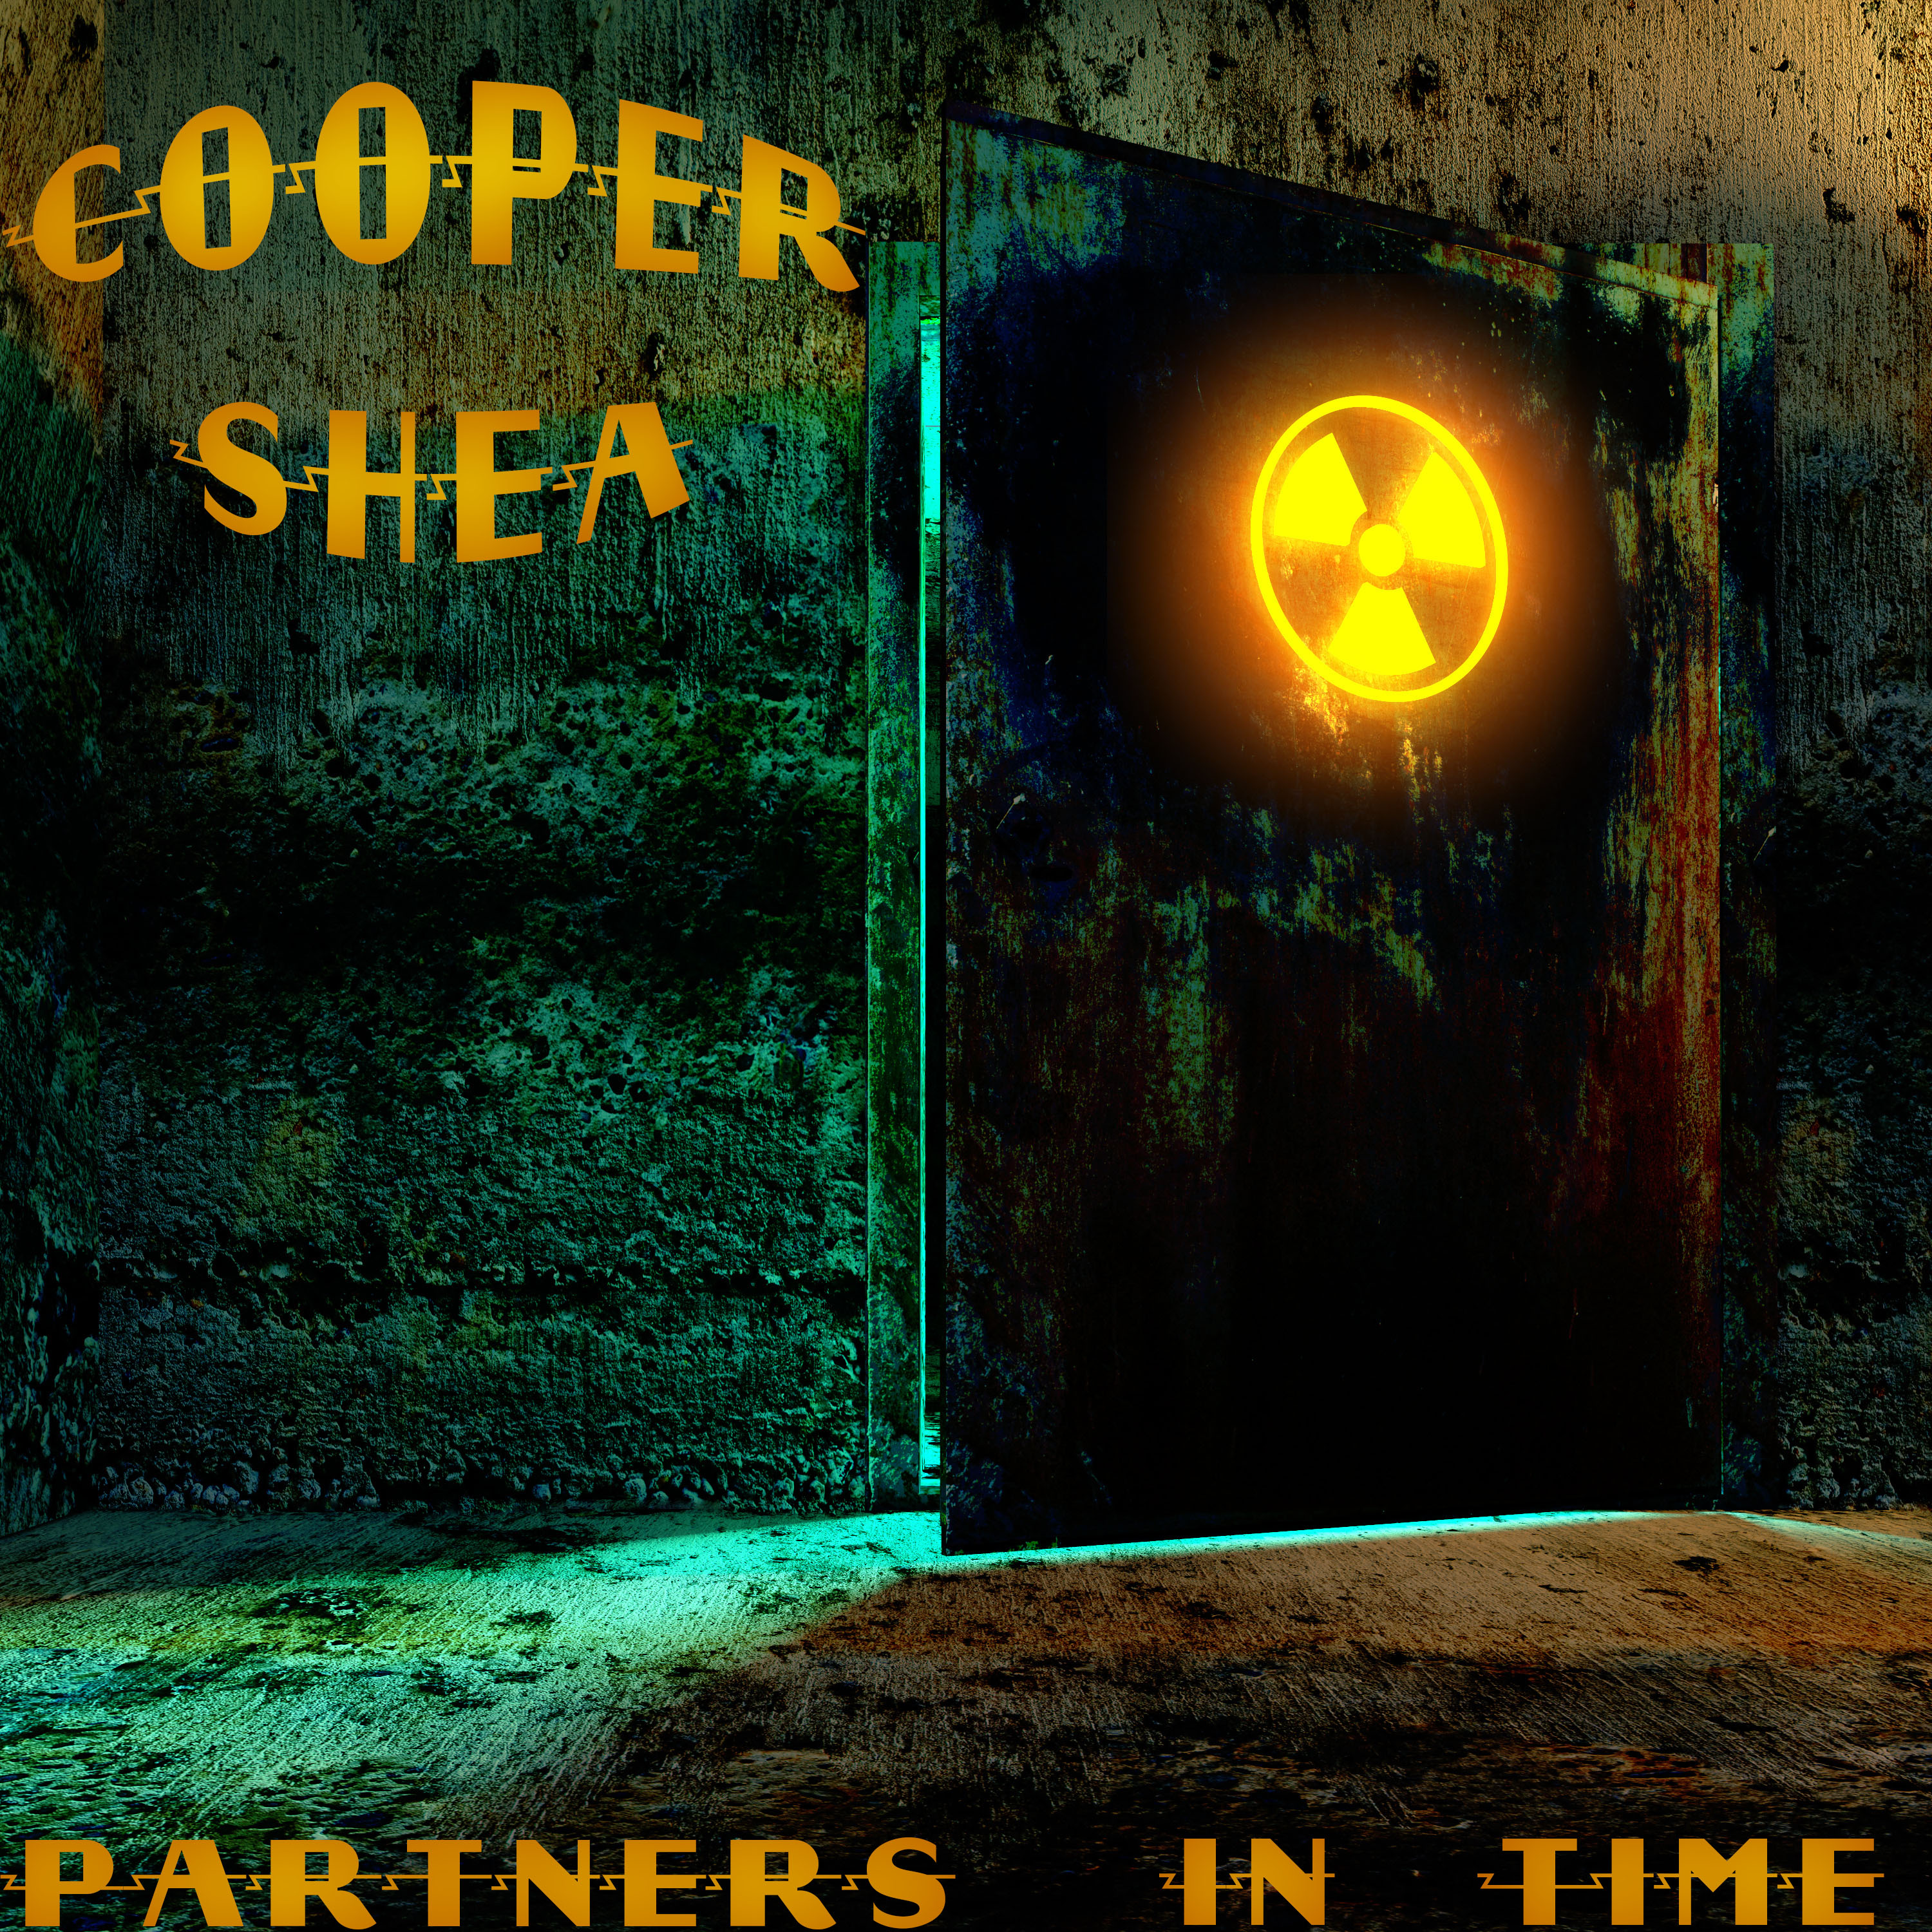 Cooper Shea – Gary Shea is back with Partners in Time!